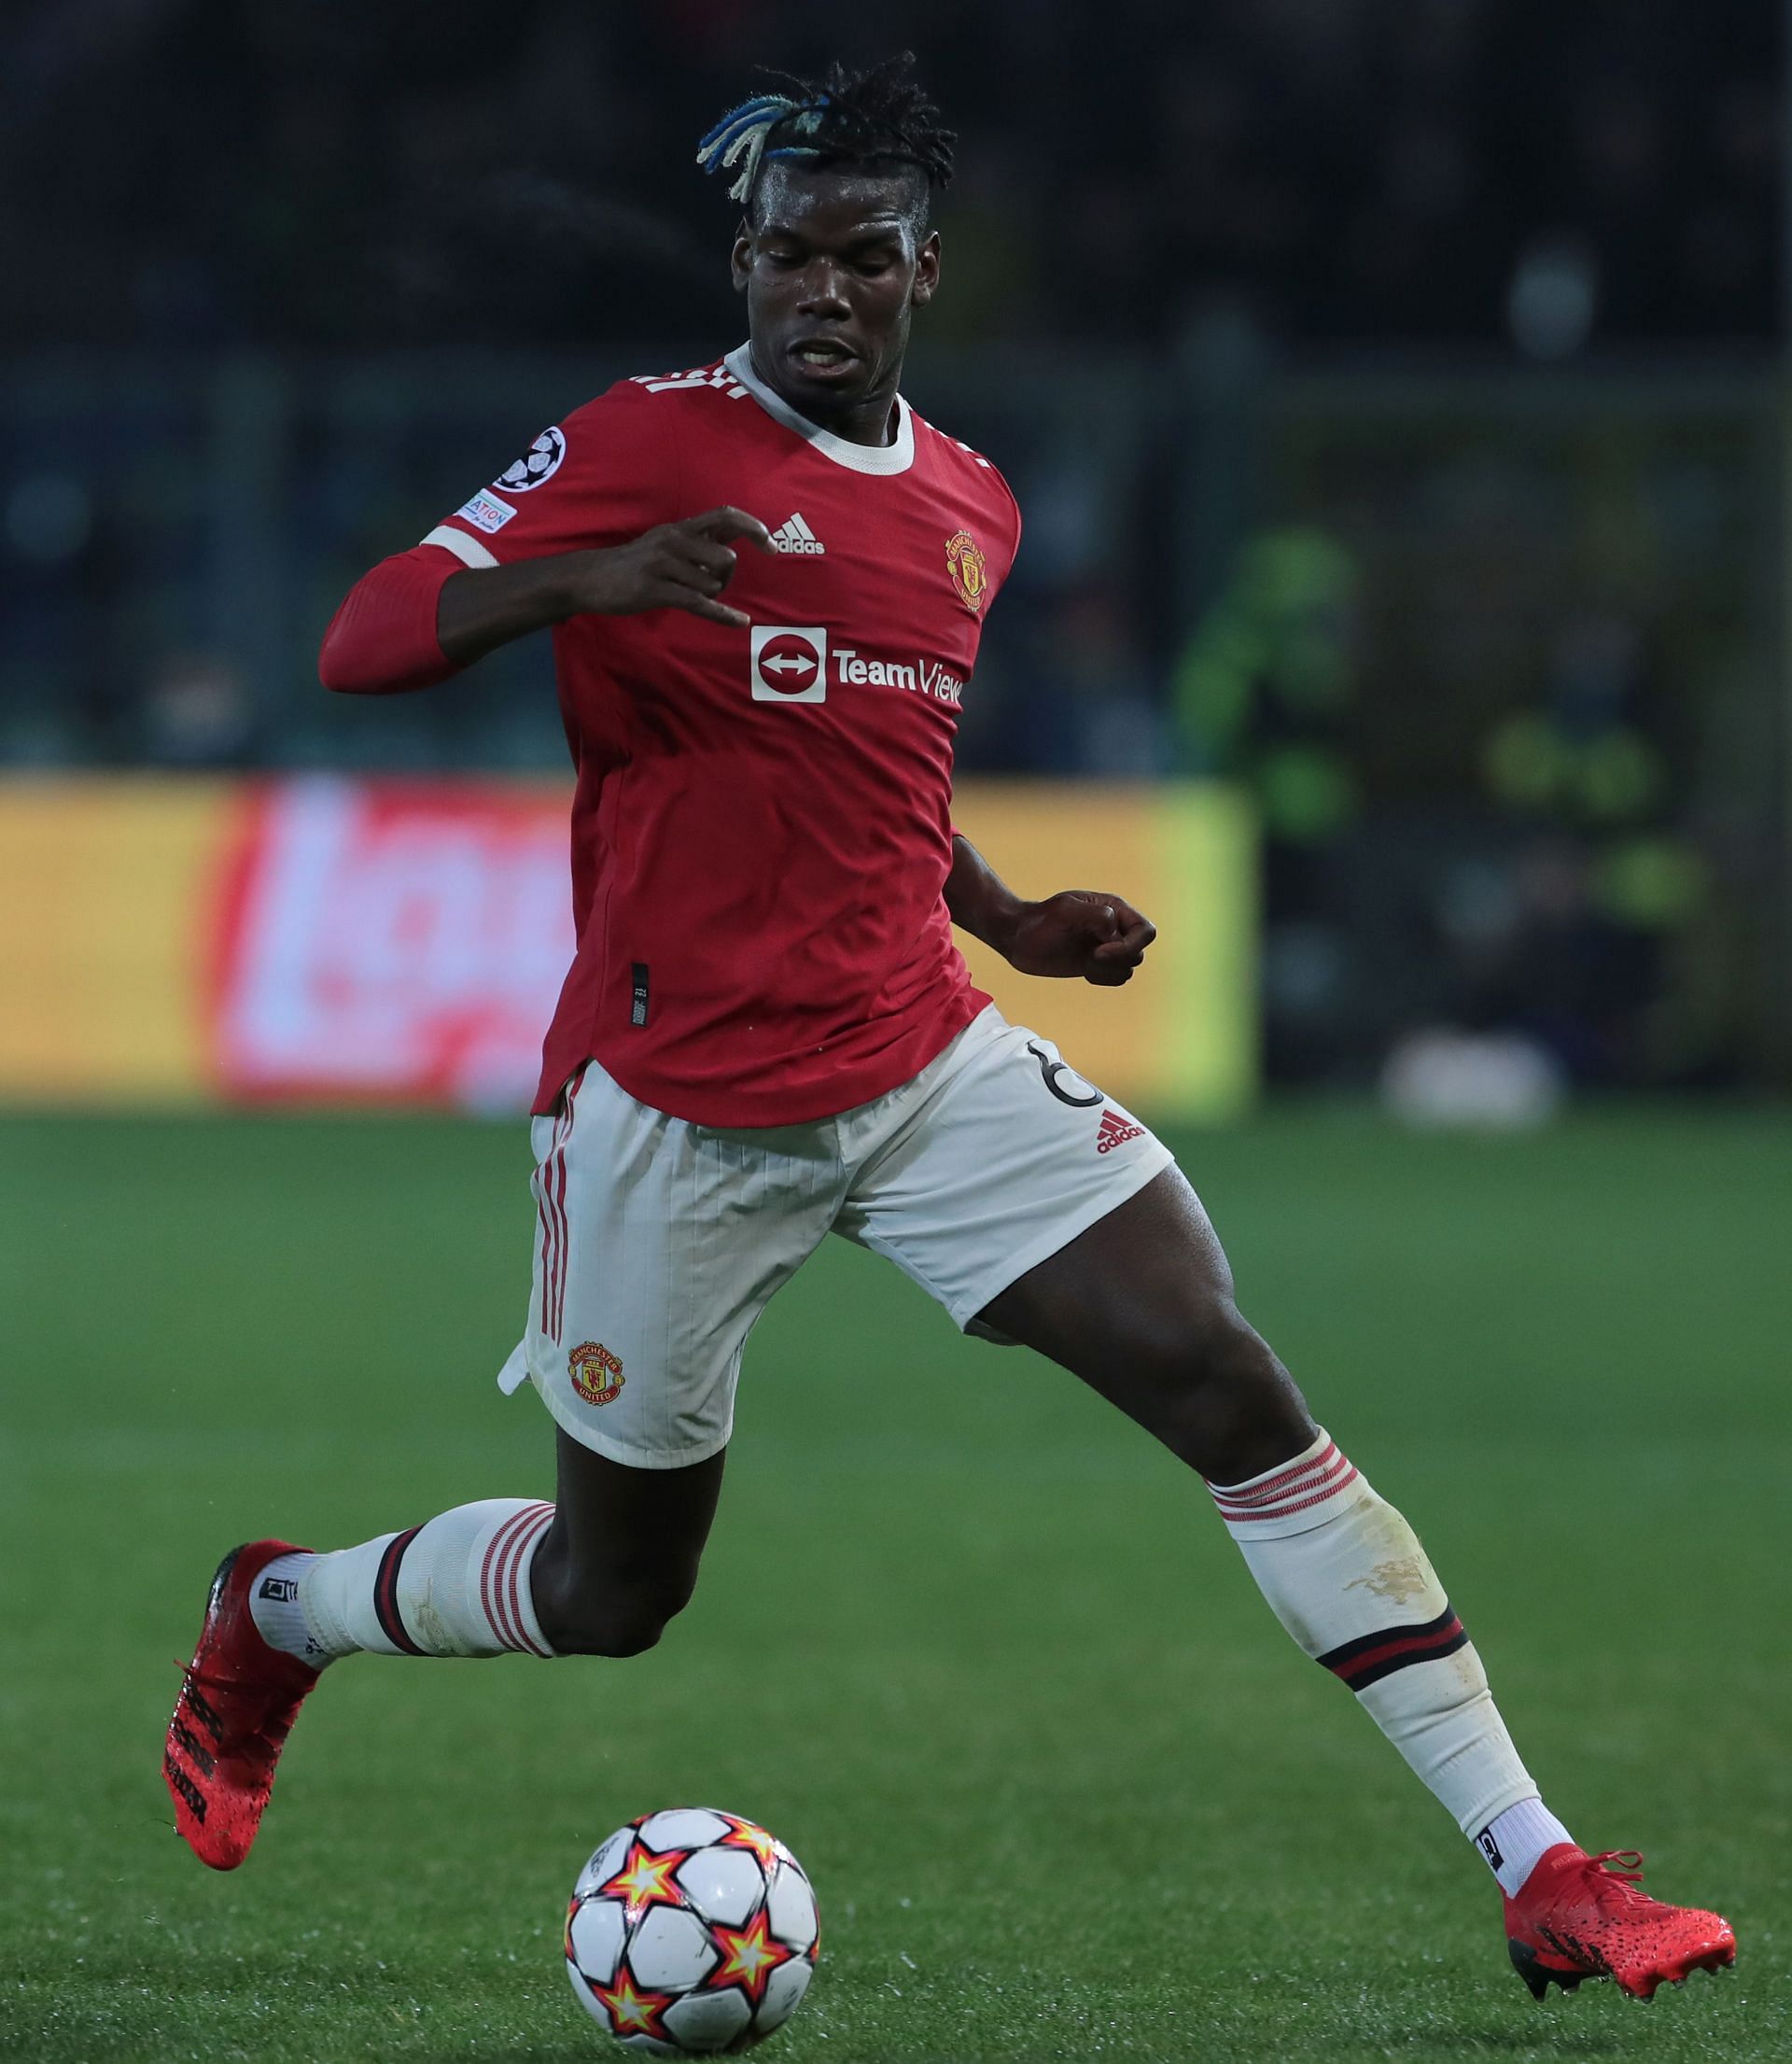 Paul Pogba is reportedly very close to leaving Manchester United; Real Madrid could be his potential destination.